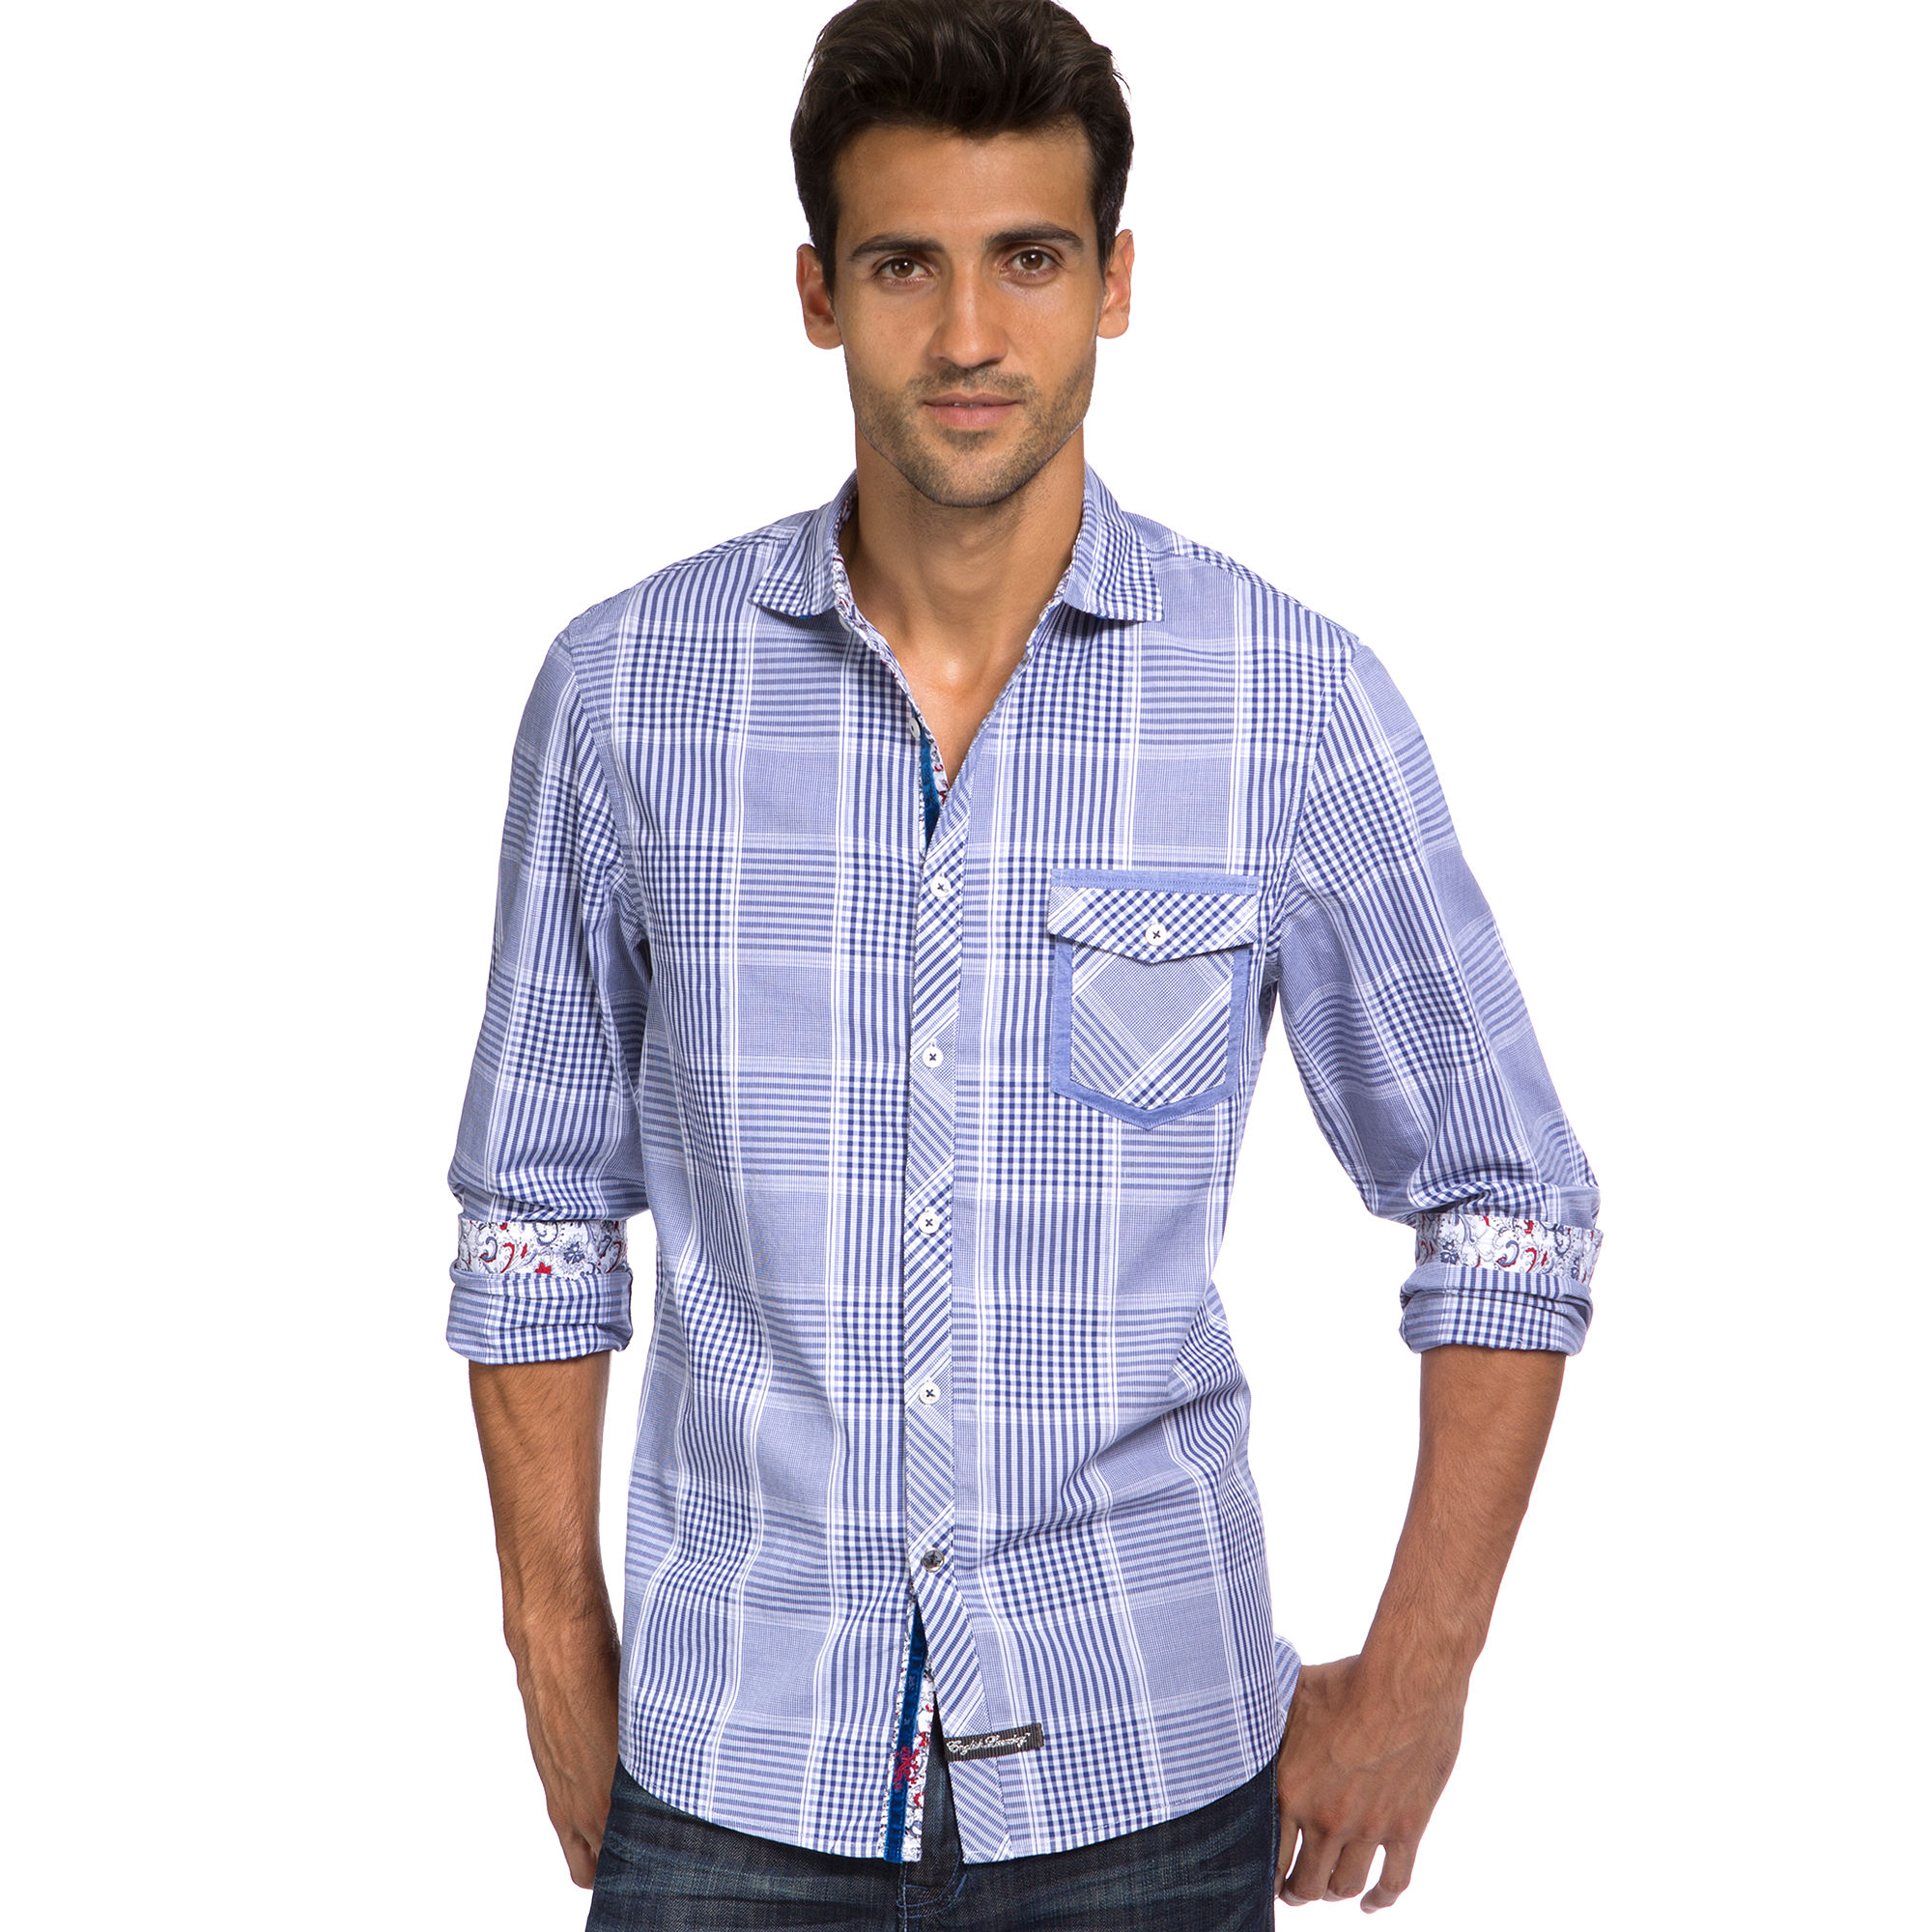 Lyst - English Laundry The Scarborough Shirt in Blue for Men